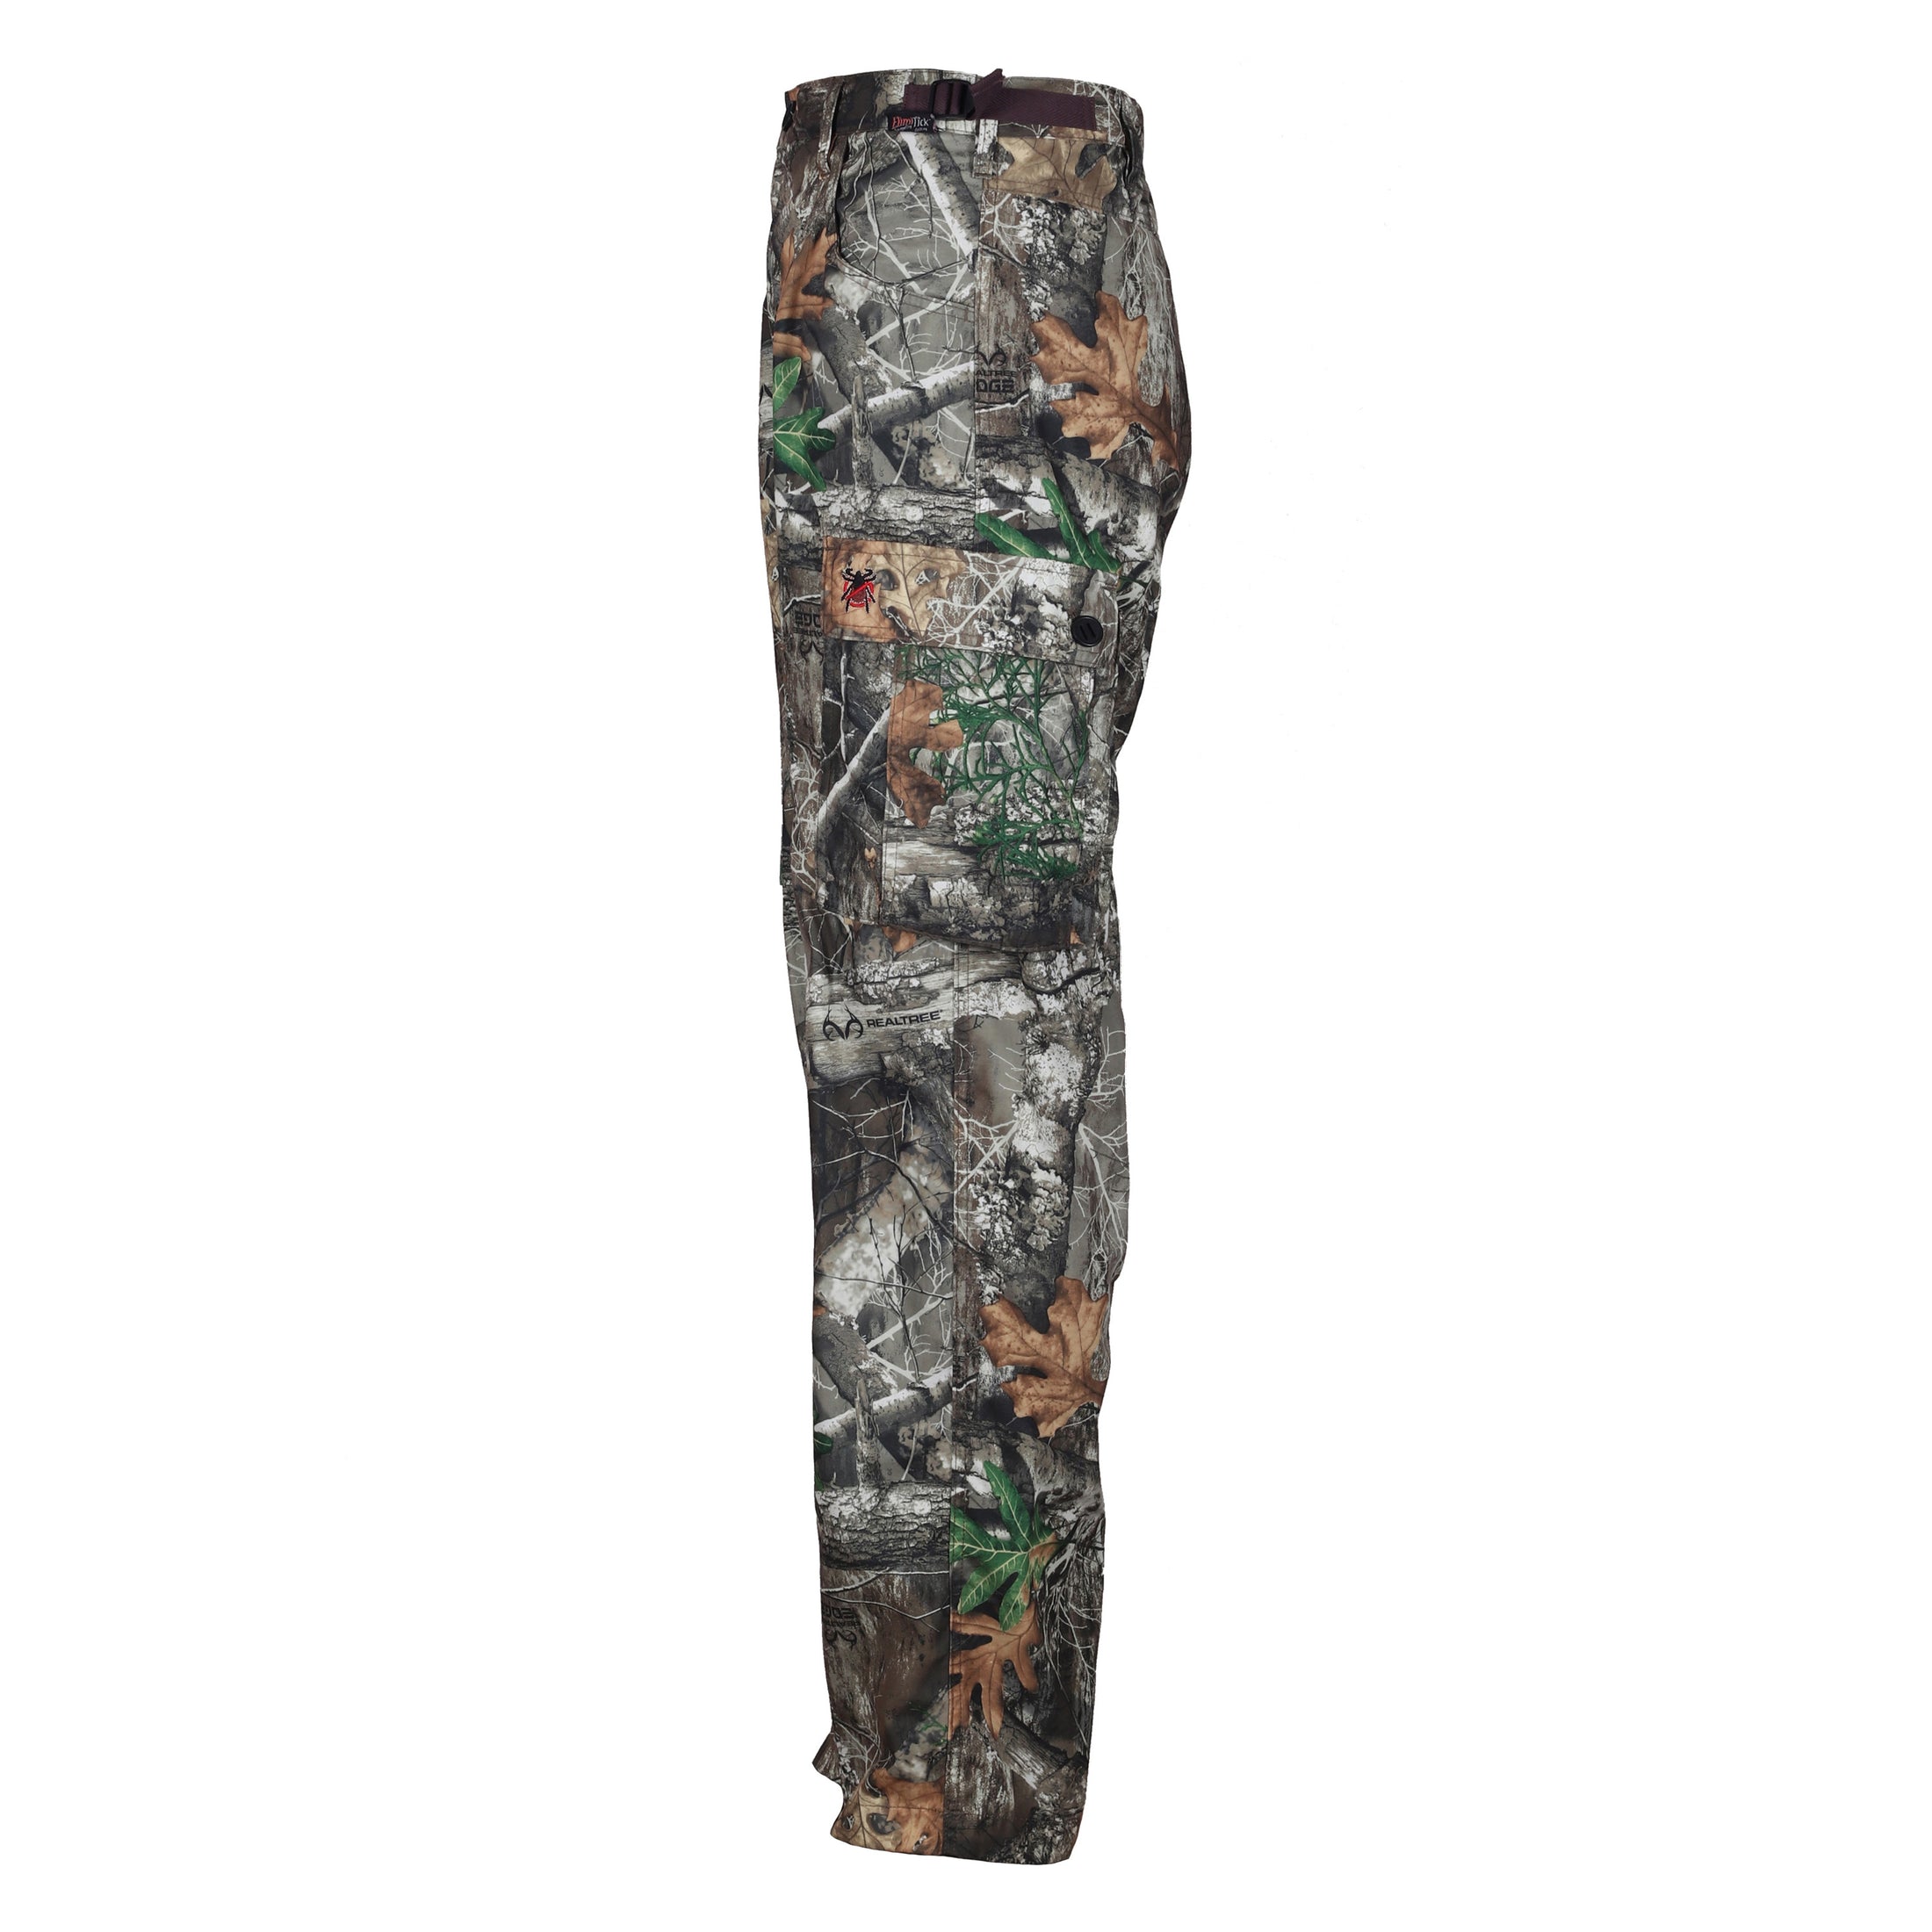 gamehide ElimiTick Insect Repellent Five Pocket Pant side (realtree edge)